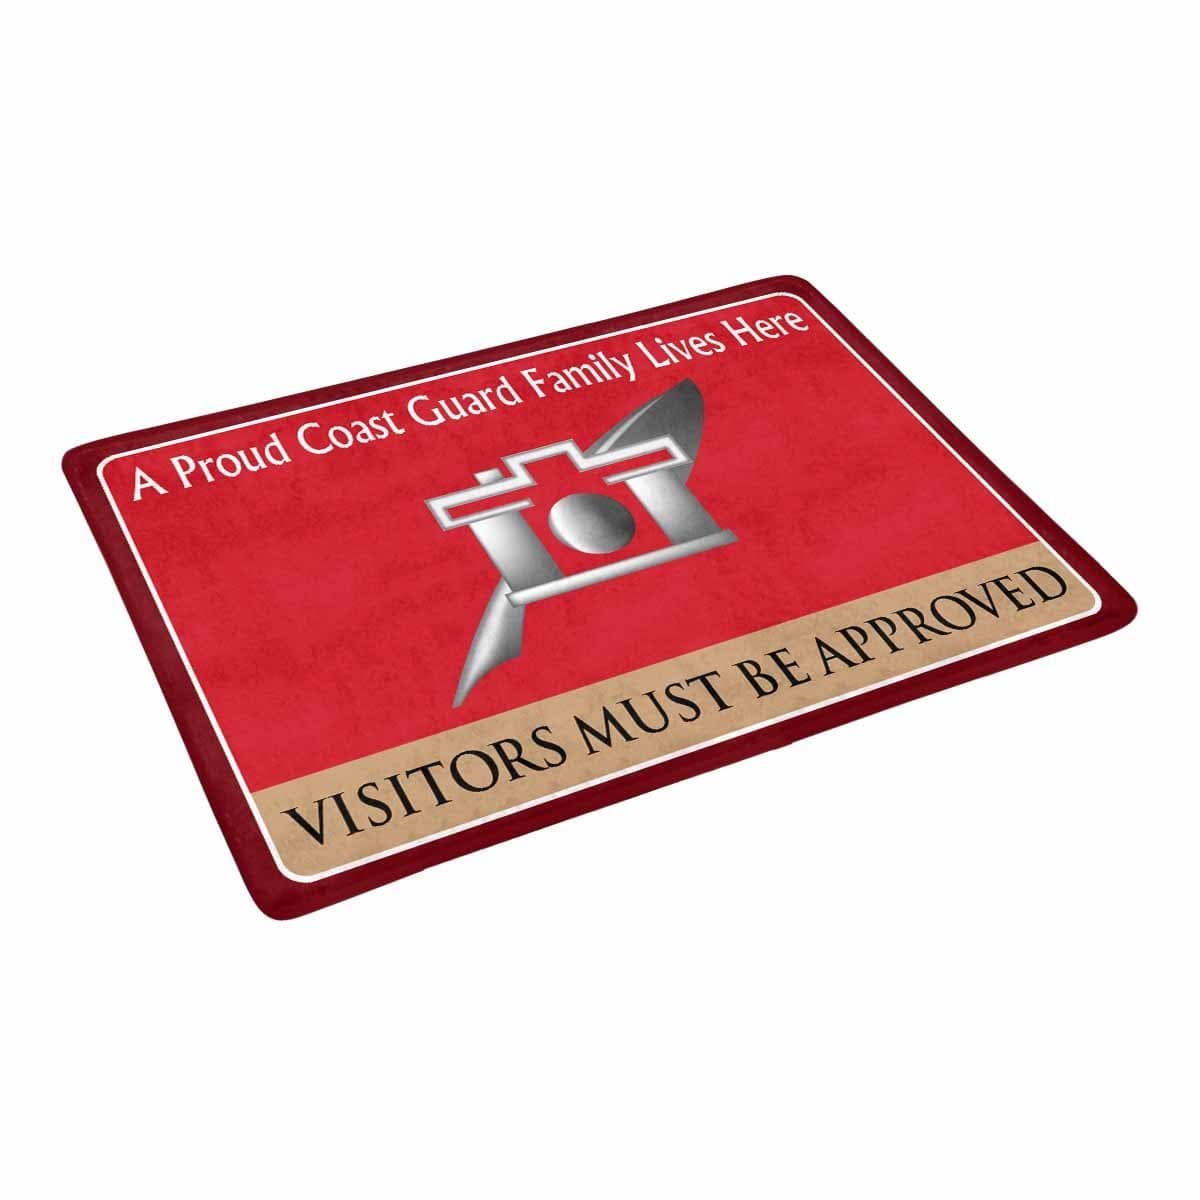 USCG PUBLIC AFFAIRS SPECIALIST PA Logo Family Doormat - Visitors must be approved (23.6 inches x 15.7 inches)-Doormat-USCG-Rate-Veterans Nation